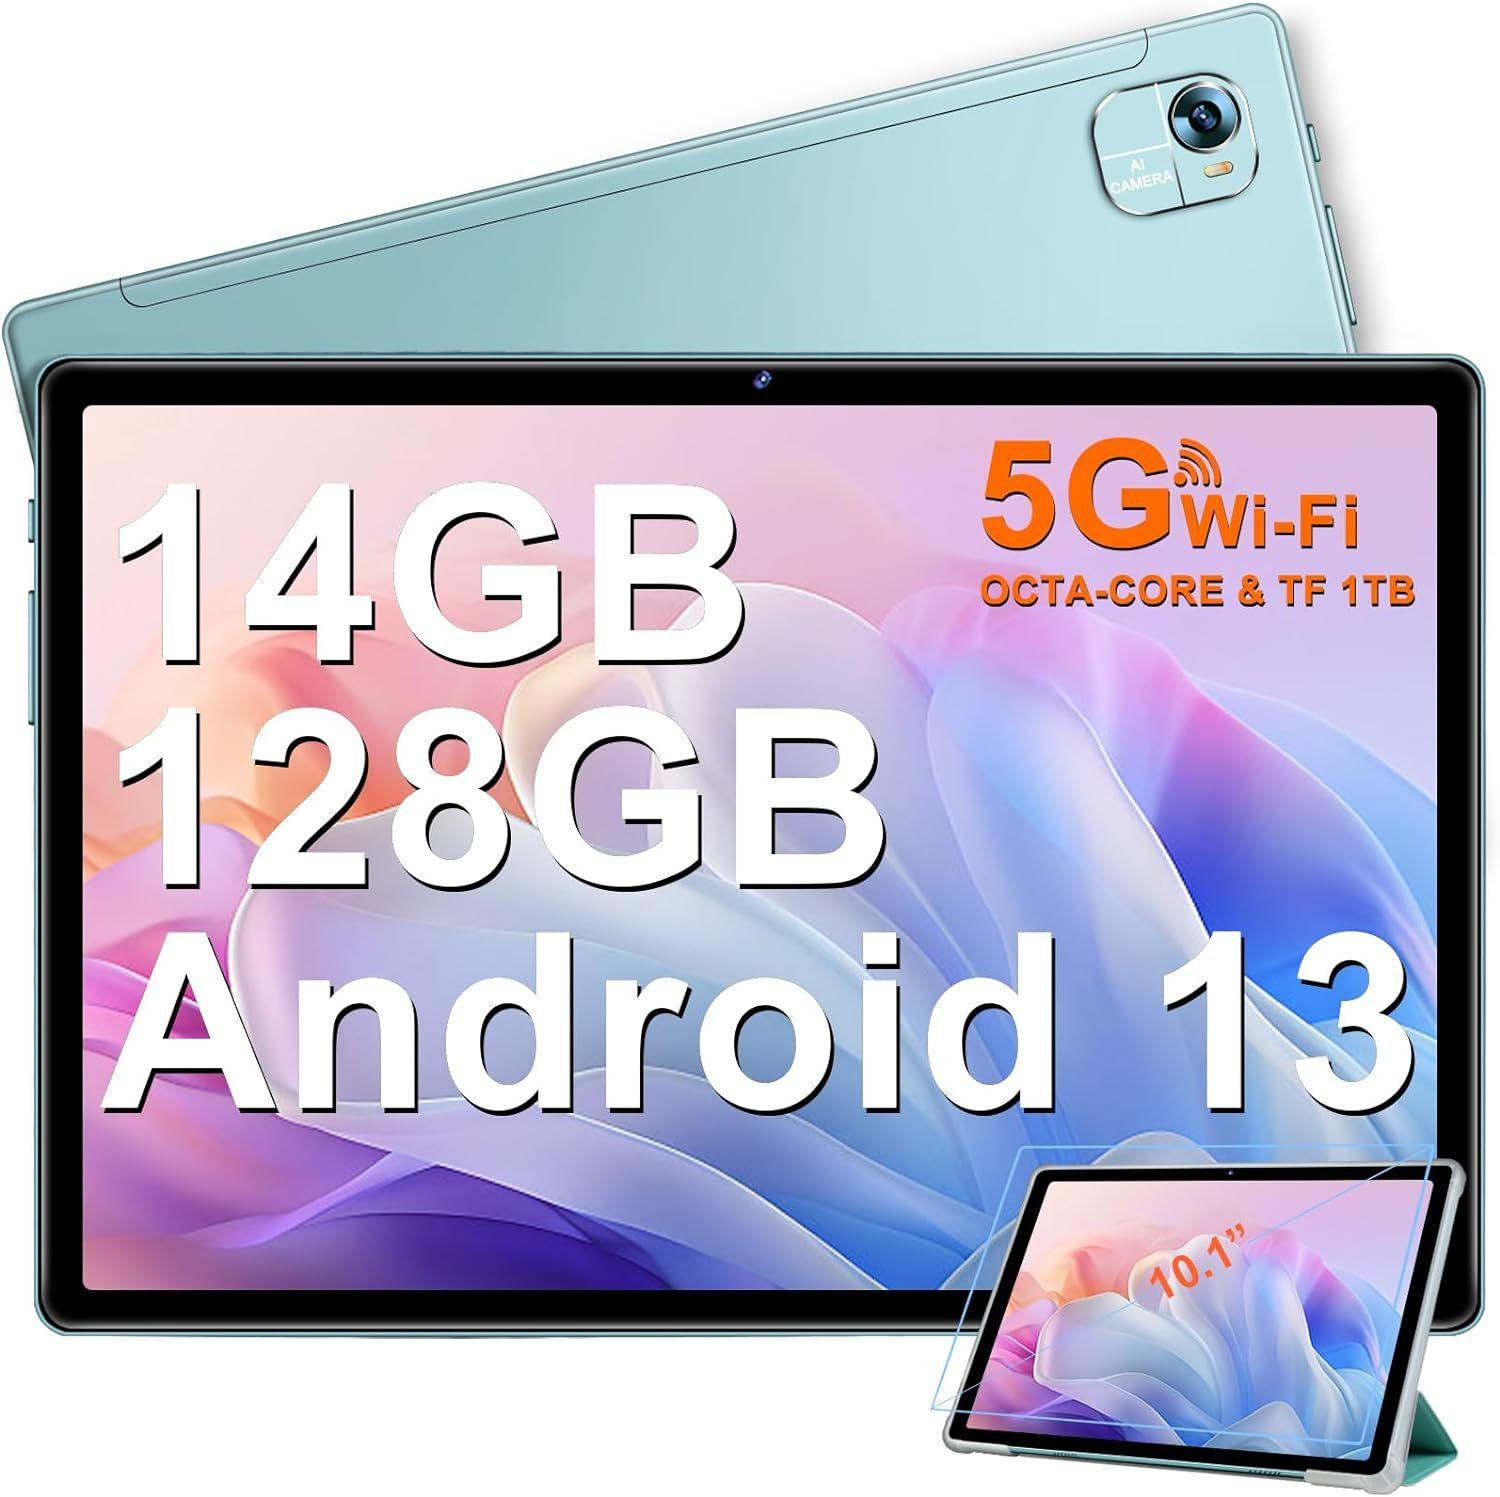 FACETEL Octa-Core 2,0 GHz Prozessor Tablet (10, 128 GB, Android